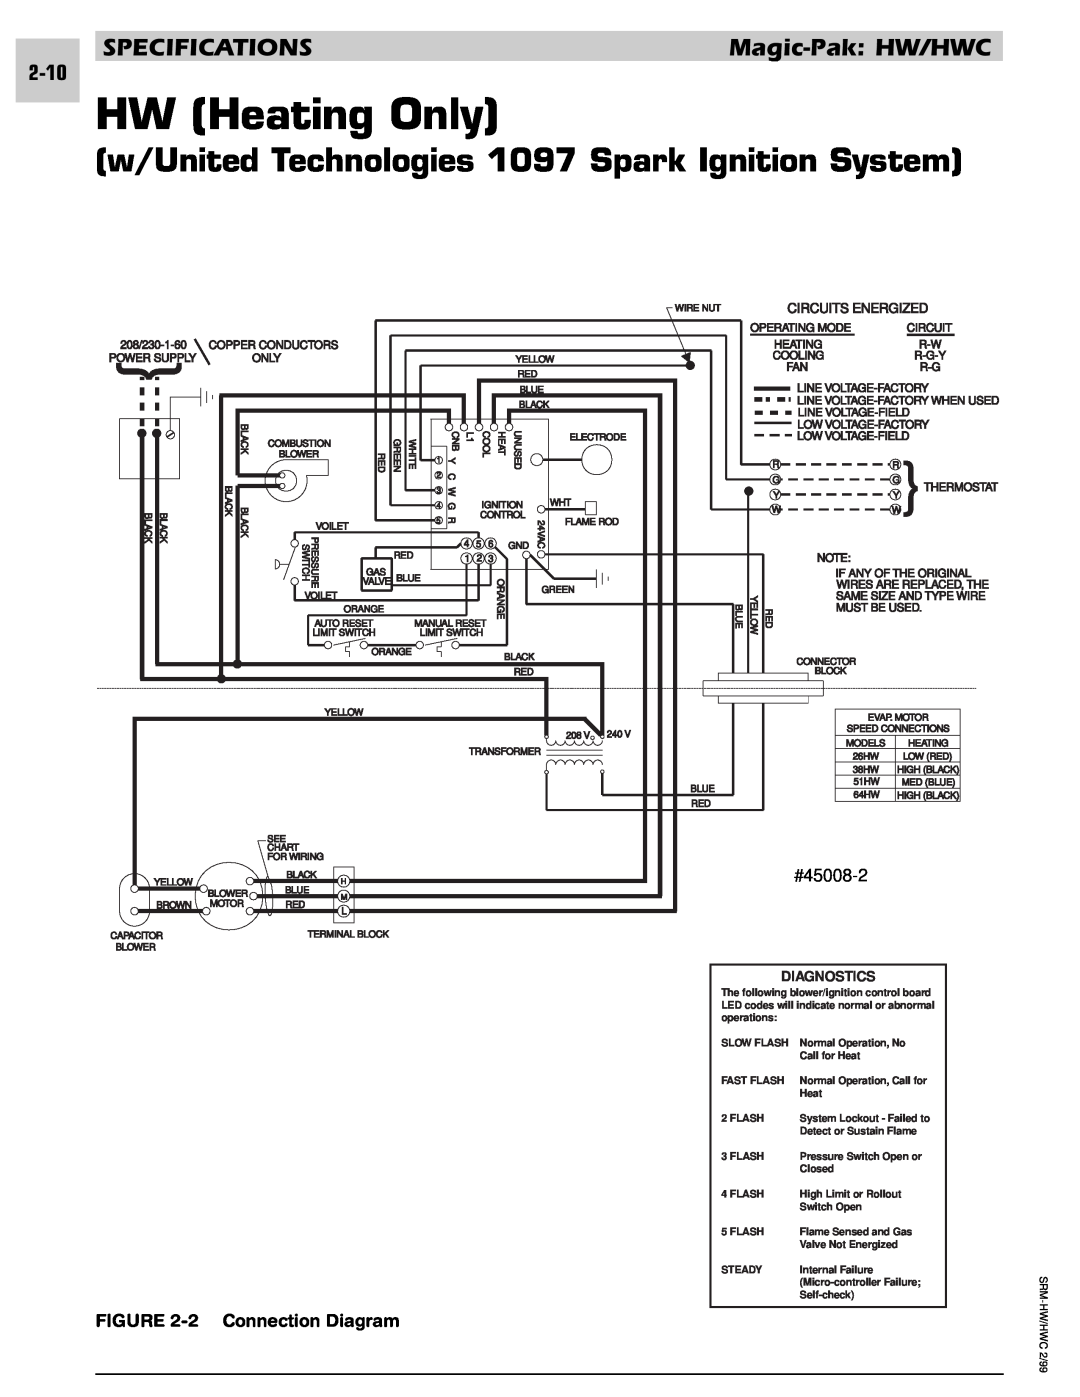 Armstrong World Industries 123, 243 HW Heating Only, w/United Technologies 1097 Spark Ignition System, Connection Diagram 